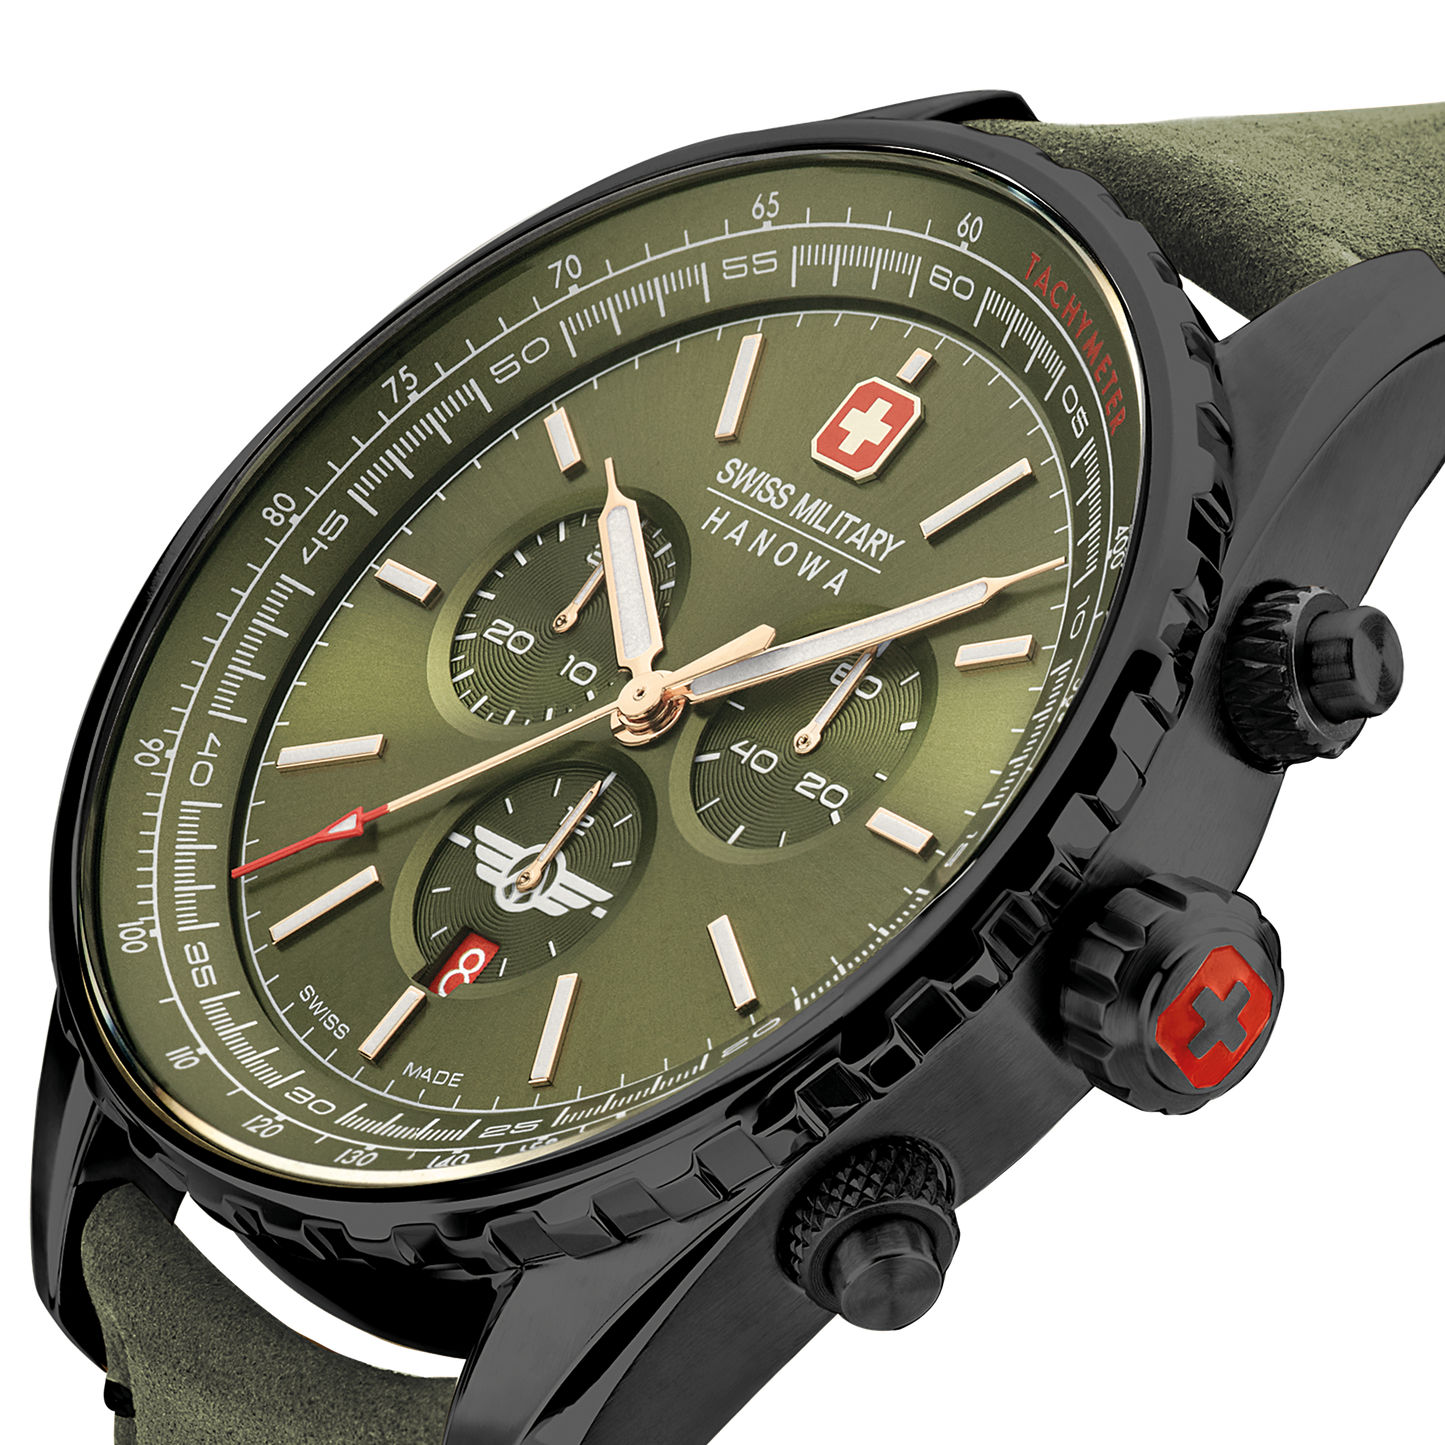 Swiss Military Hanowa Afterburn Chrono. Stainless steel case in gunmetal PDV plating, olive green dial and a genuine olive green Italian leather strap. Close up image.